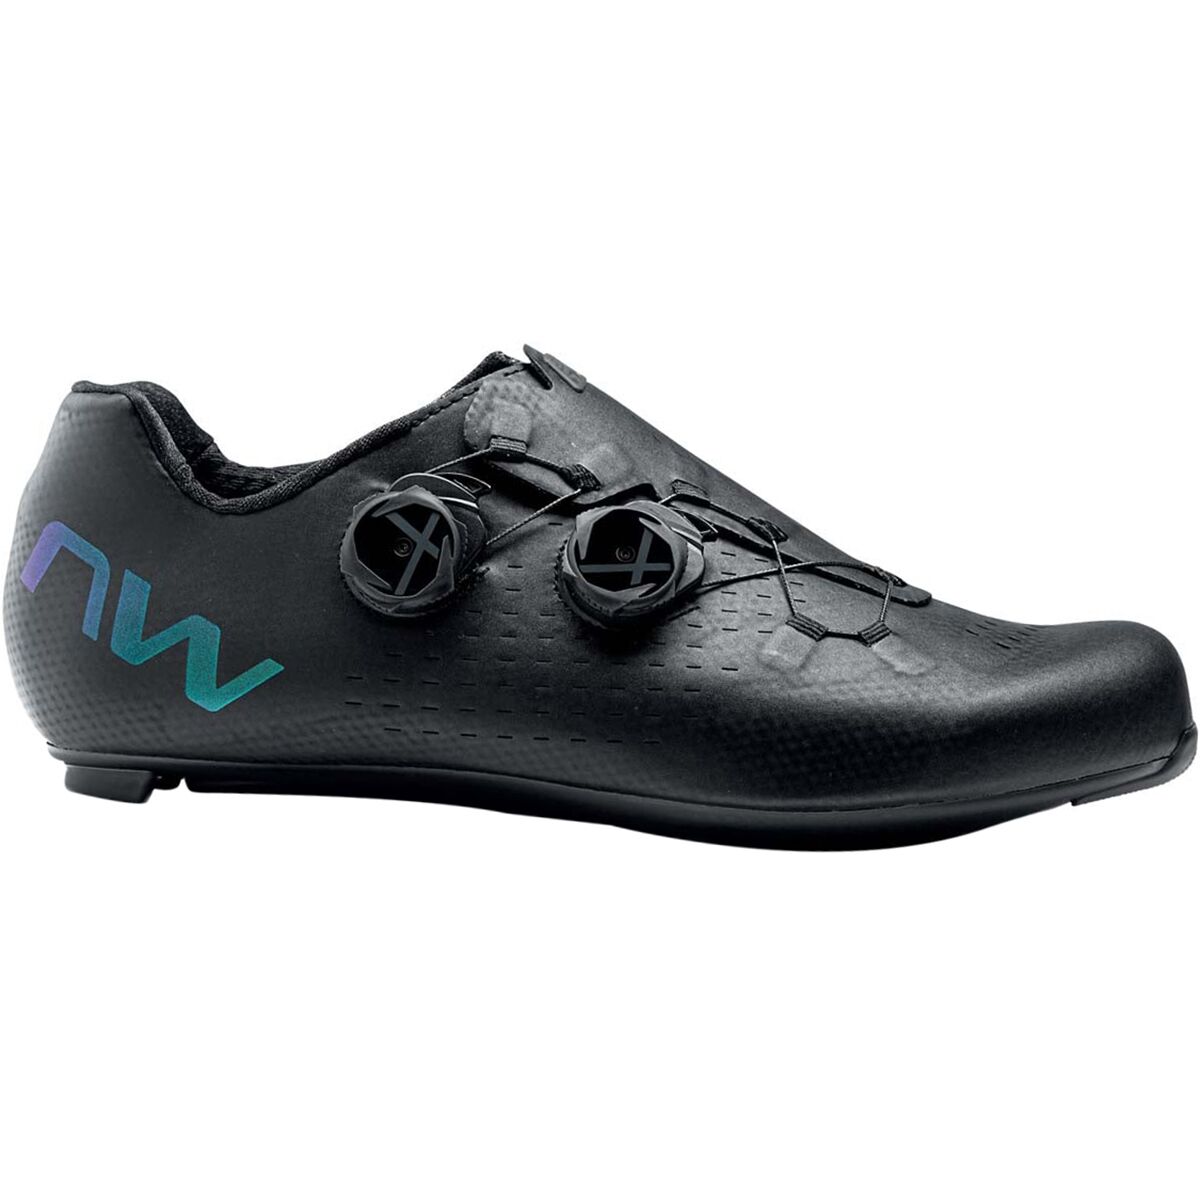 Men's Northwave Extreme GT Cycling Shoe 